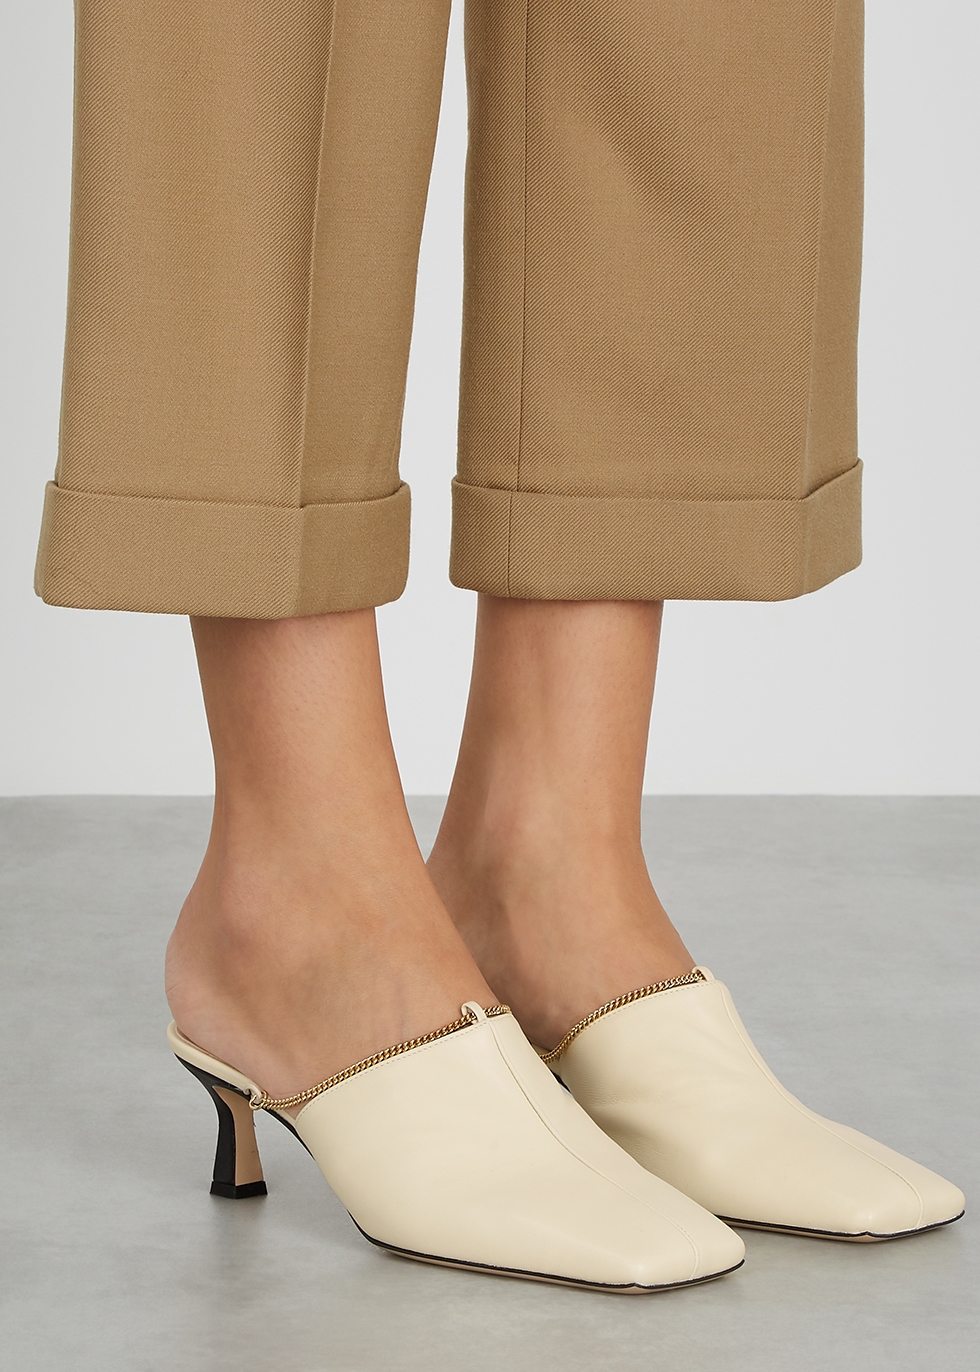 leather tan mules